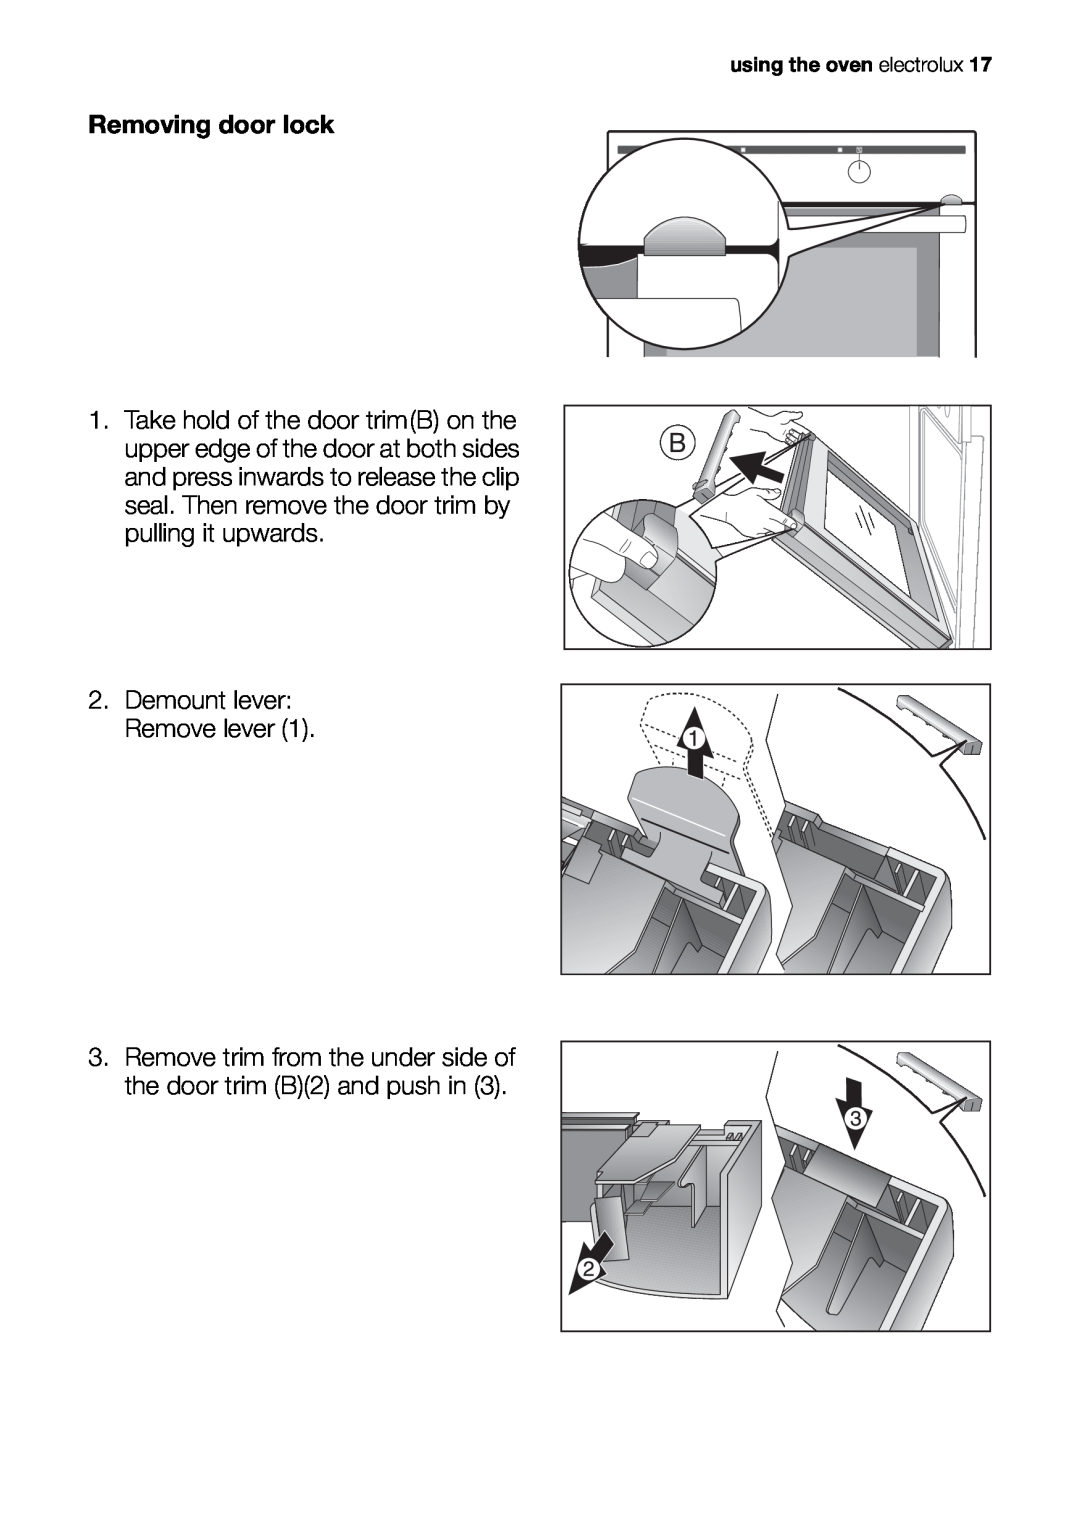 Electrolux EOB20001 user manual Removing door lock, Demount lever Remove lever, using the oven electrolux 